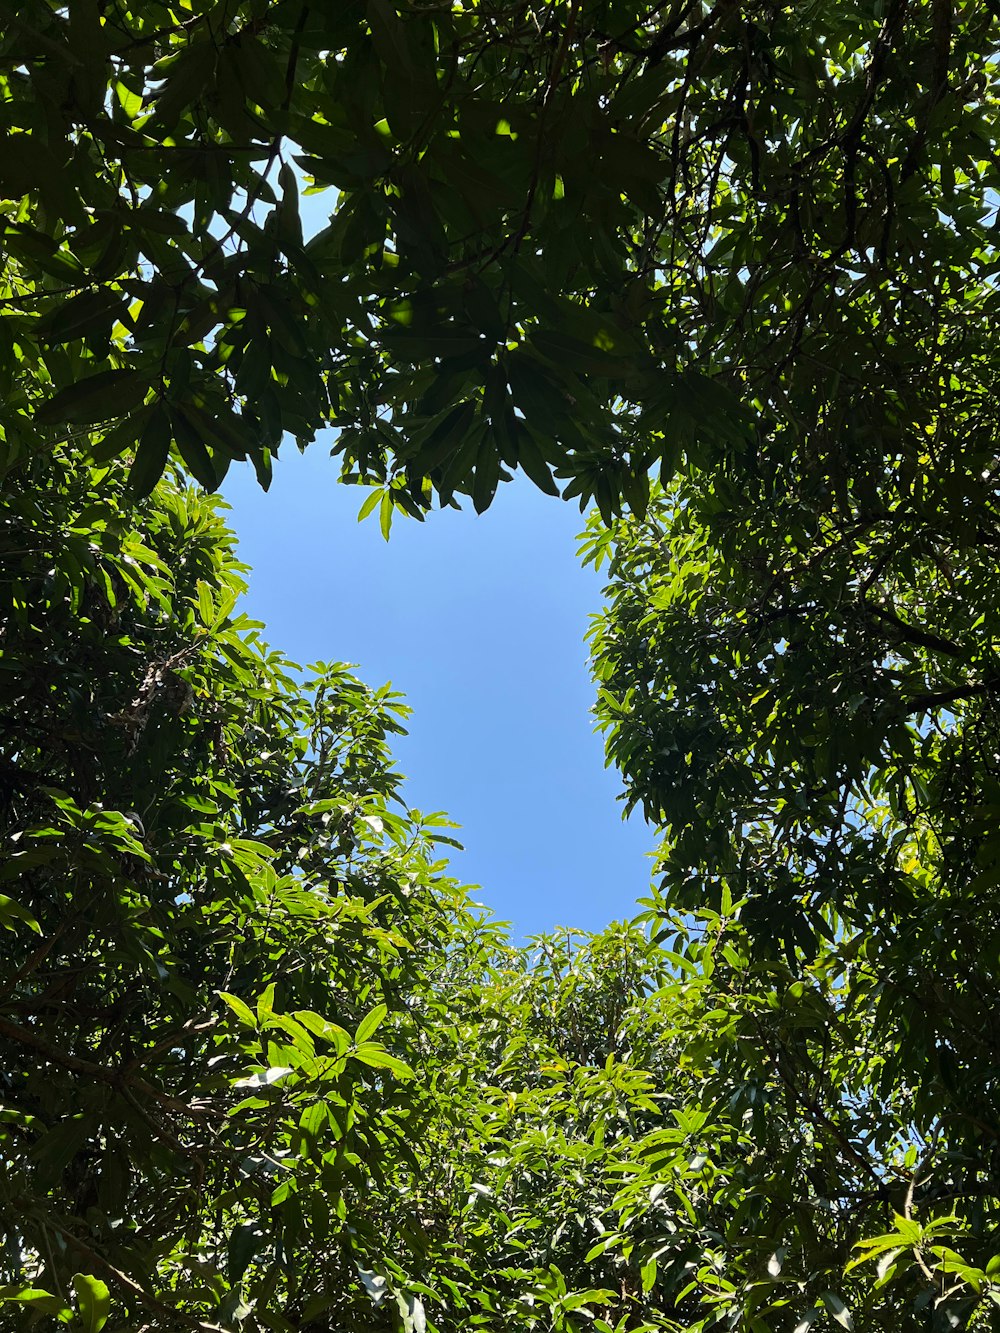 a view of a blue sky through the leaves of a tree